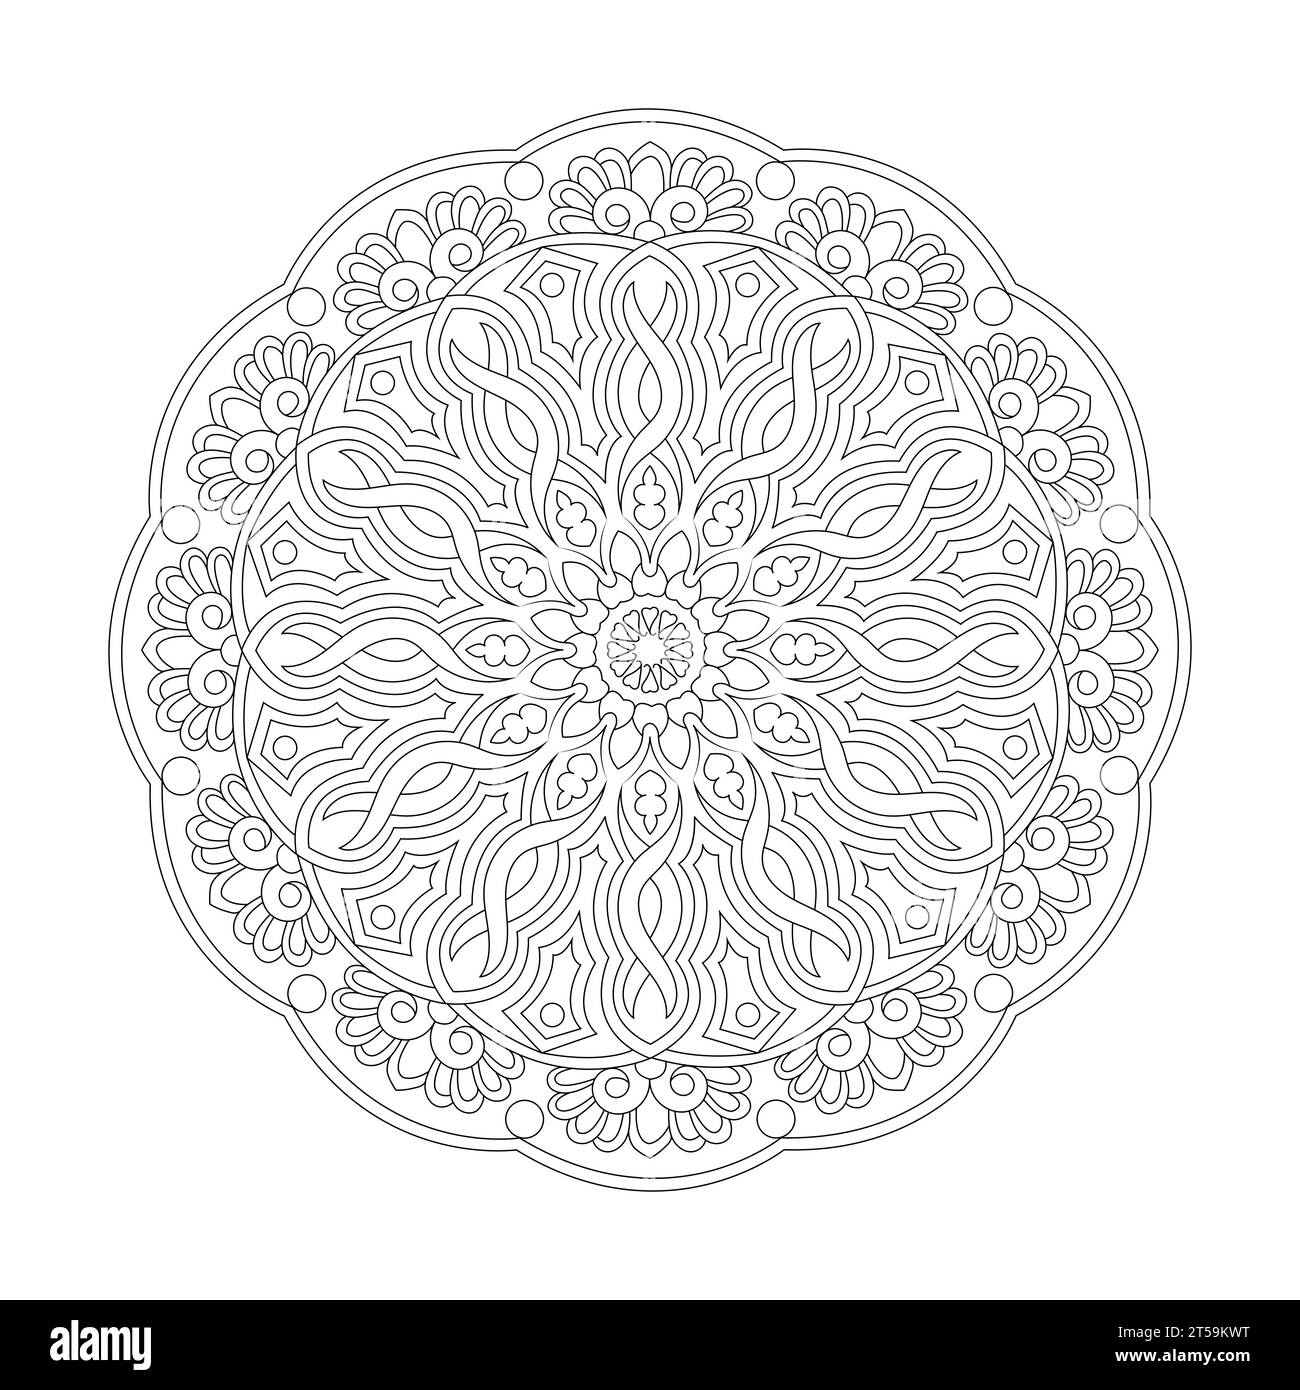 Celtic Enchanted Echoes colouring book page for KDP book interior, Ability to Relax, Brain Experiences, Harmonious Haven, Peaceful Portraits, Blossoming Stock Vector